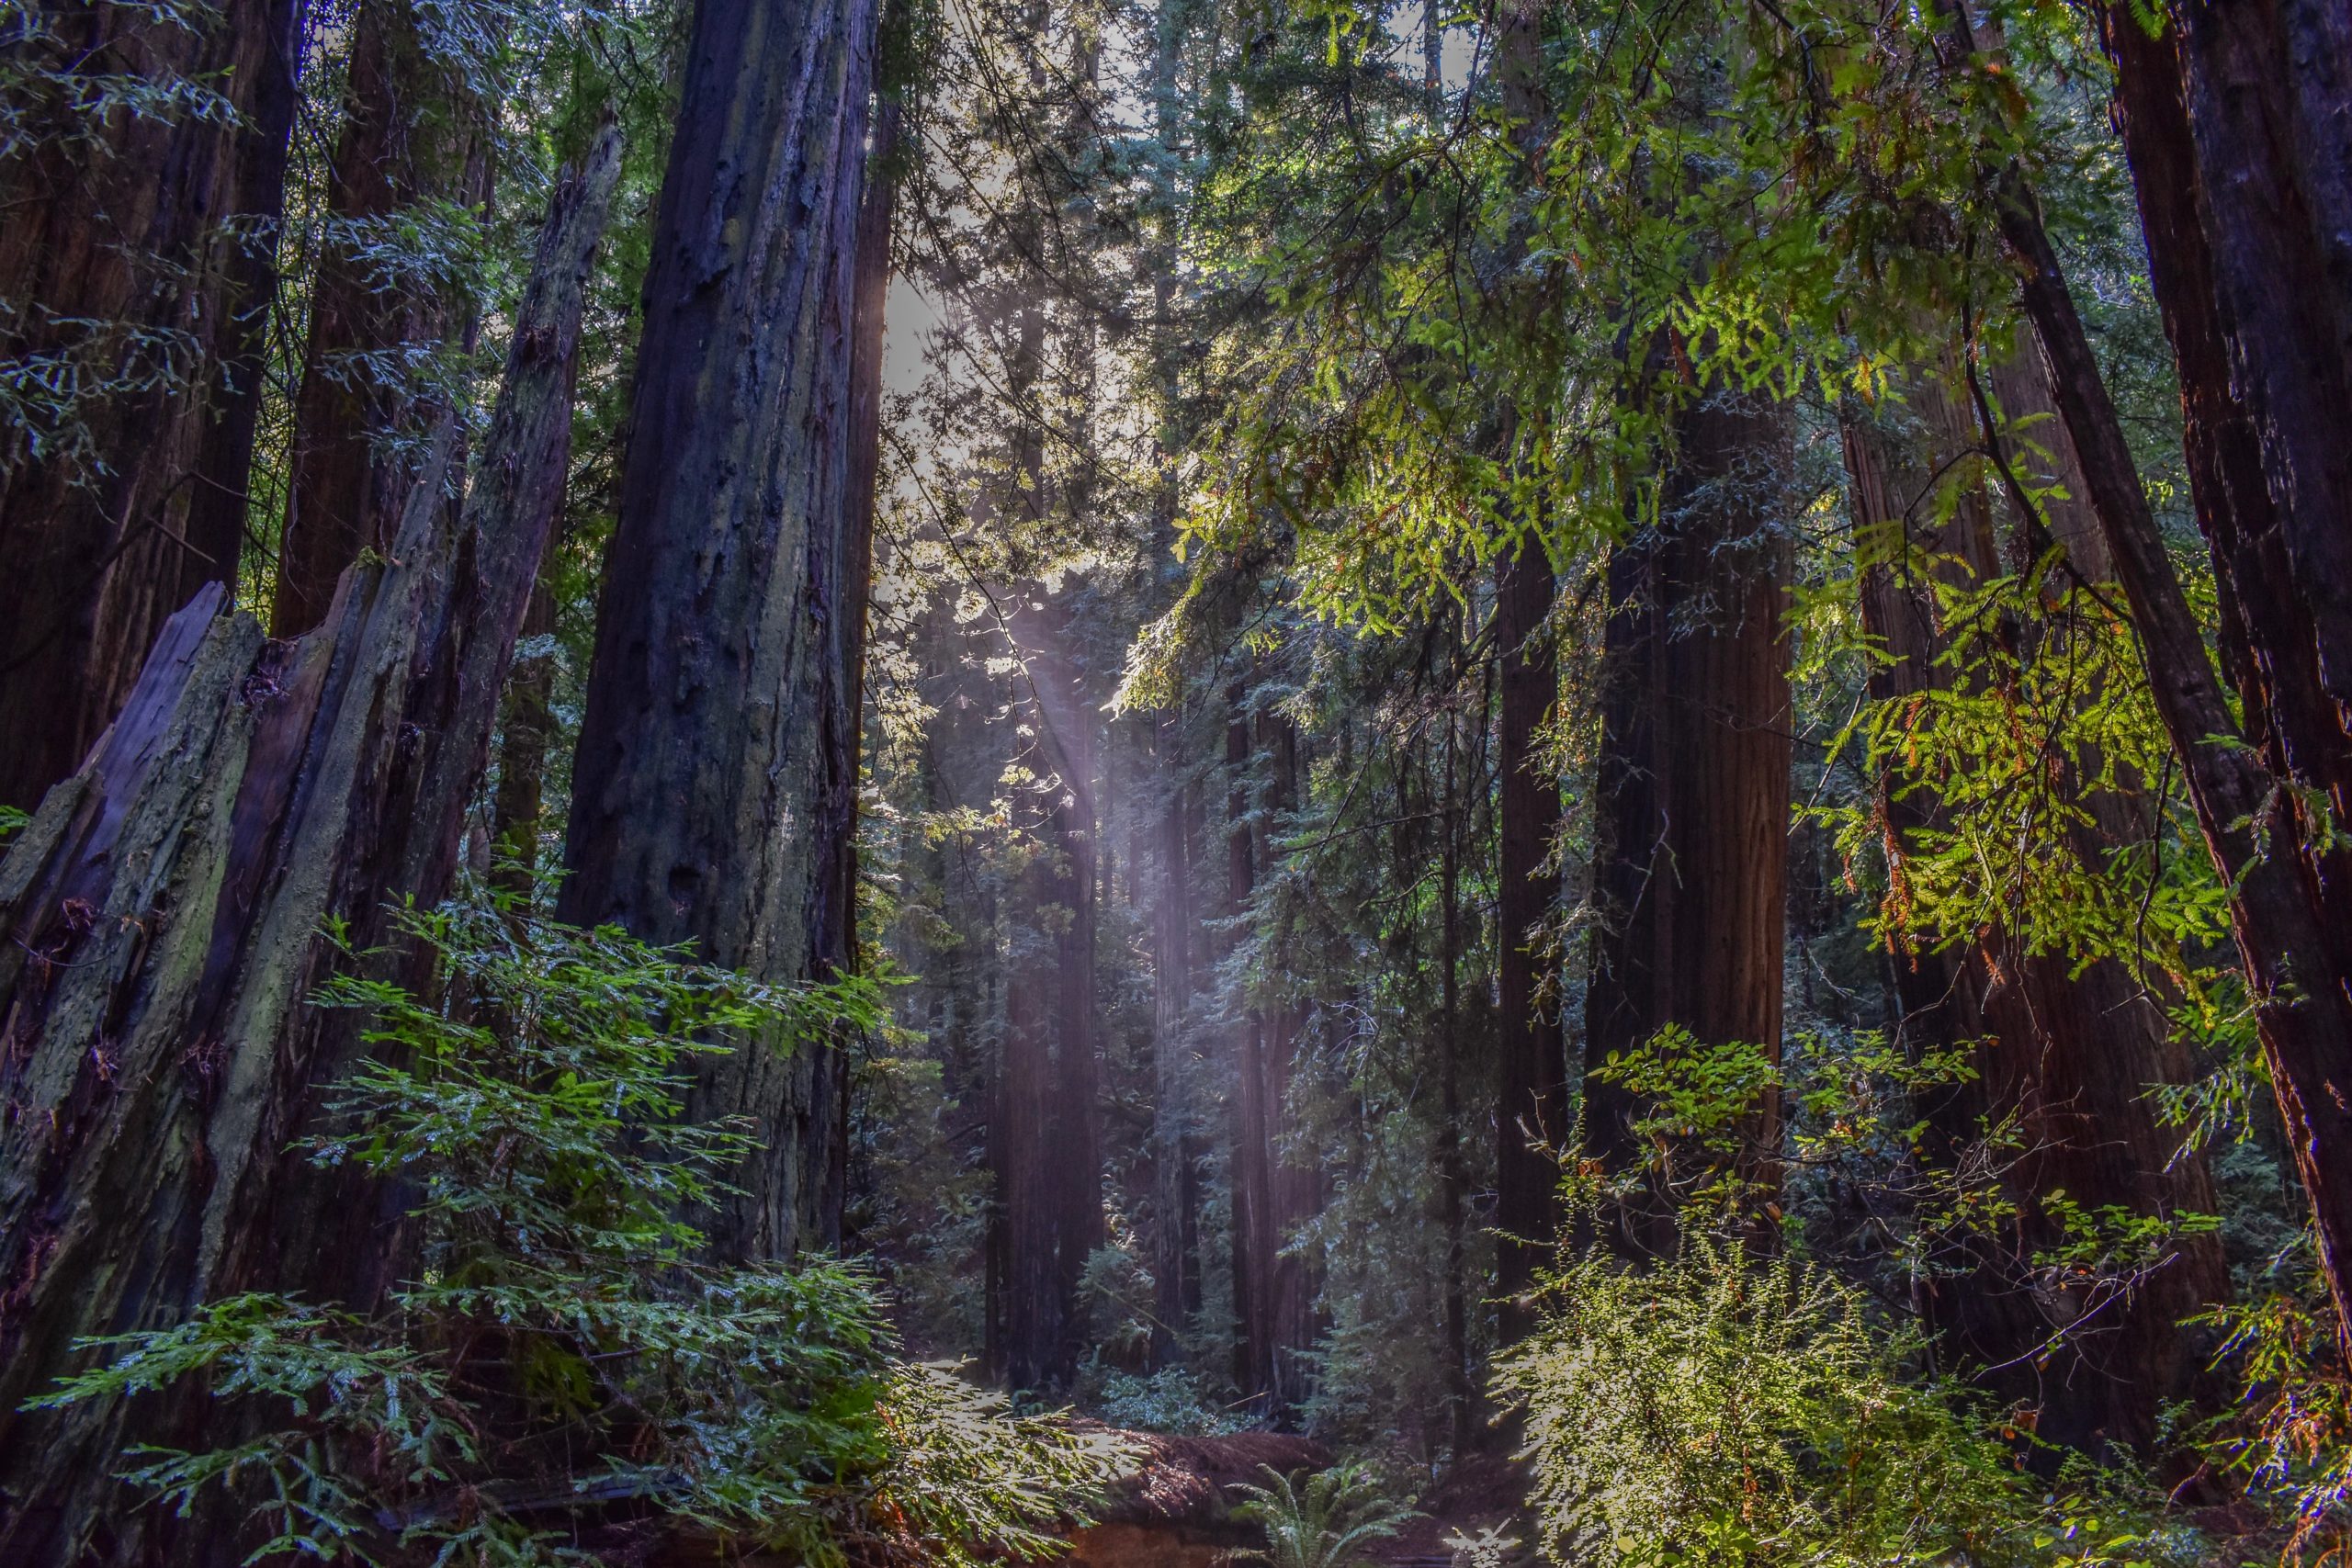 Sunlight filtering through the trees of Muir Woods